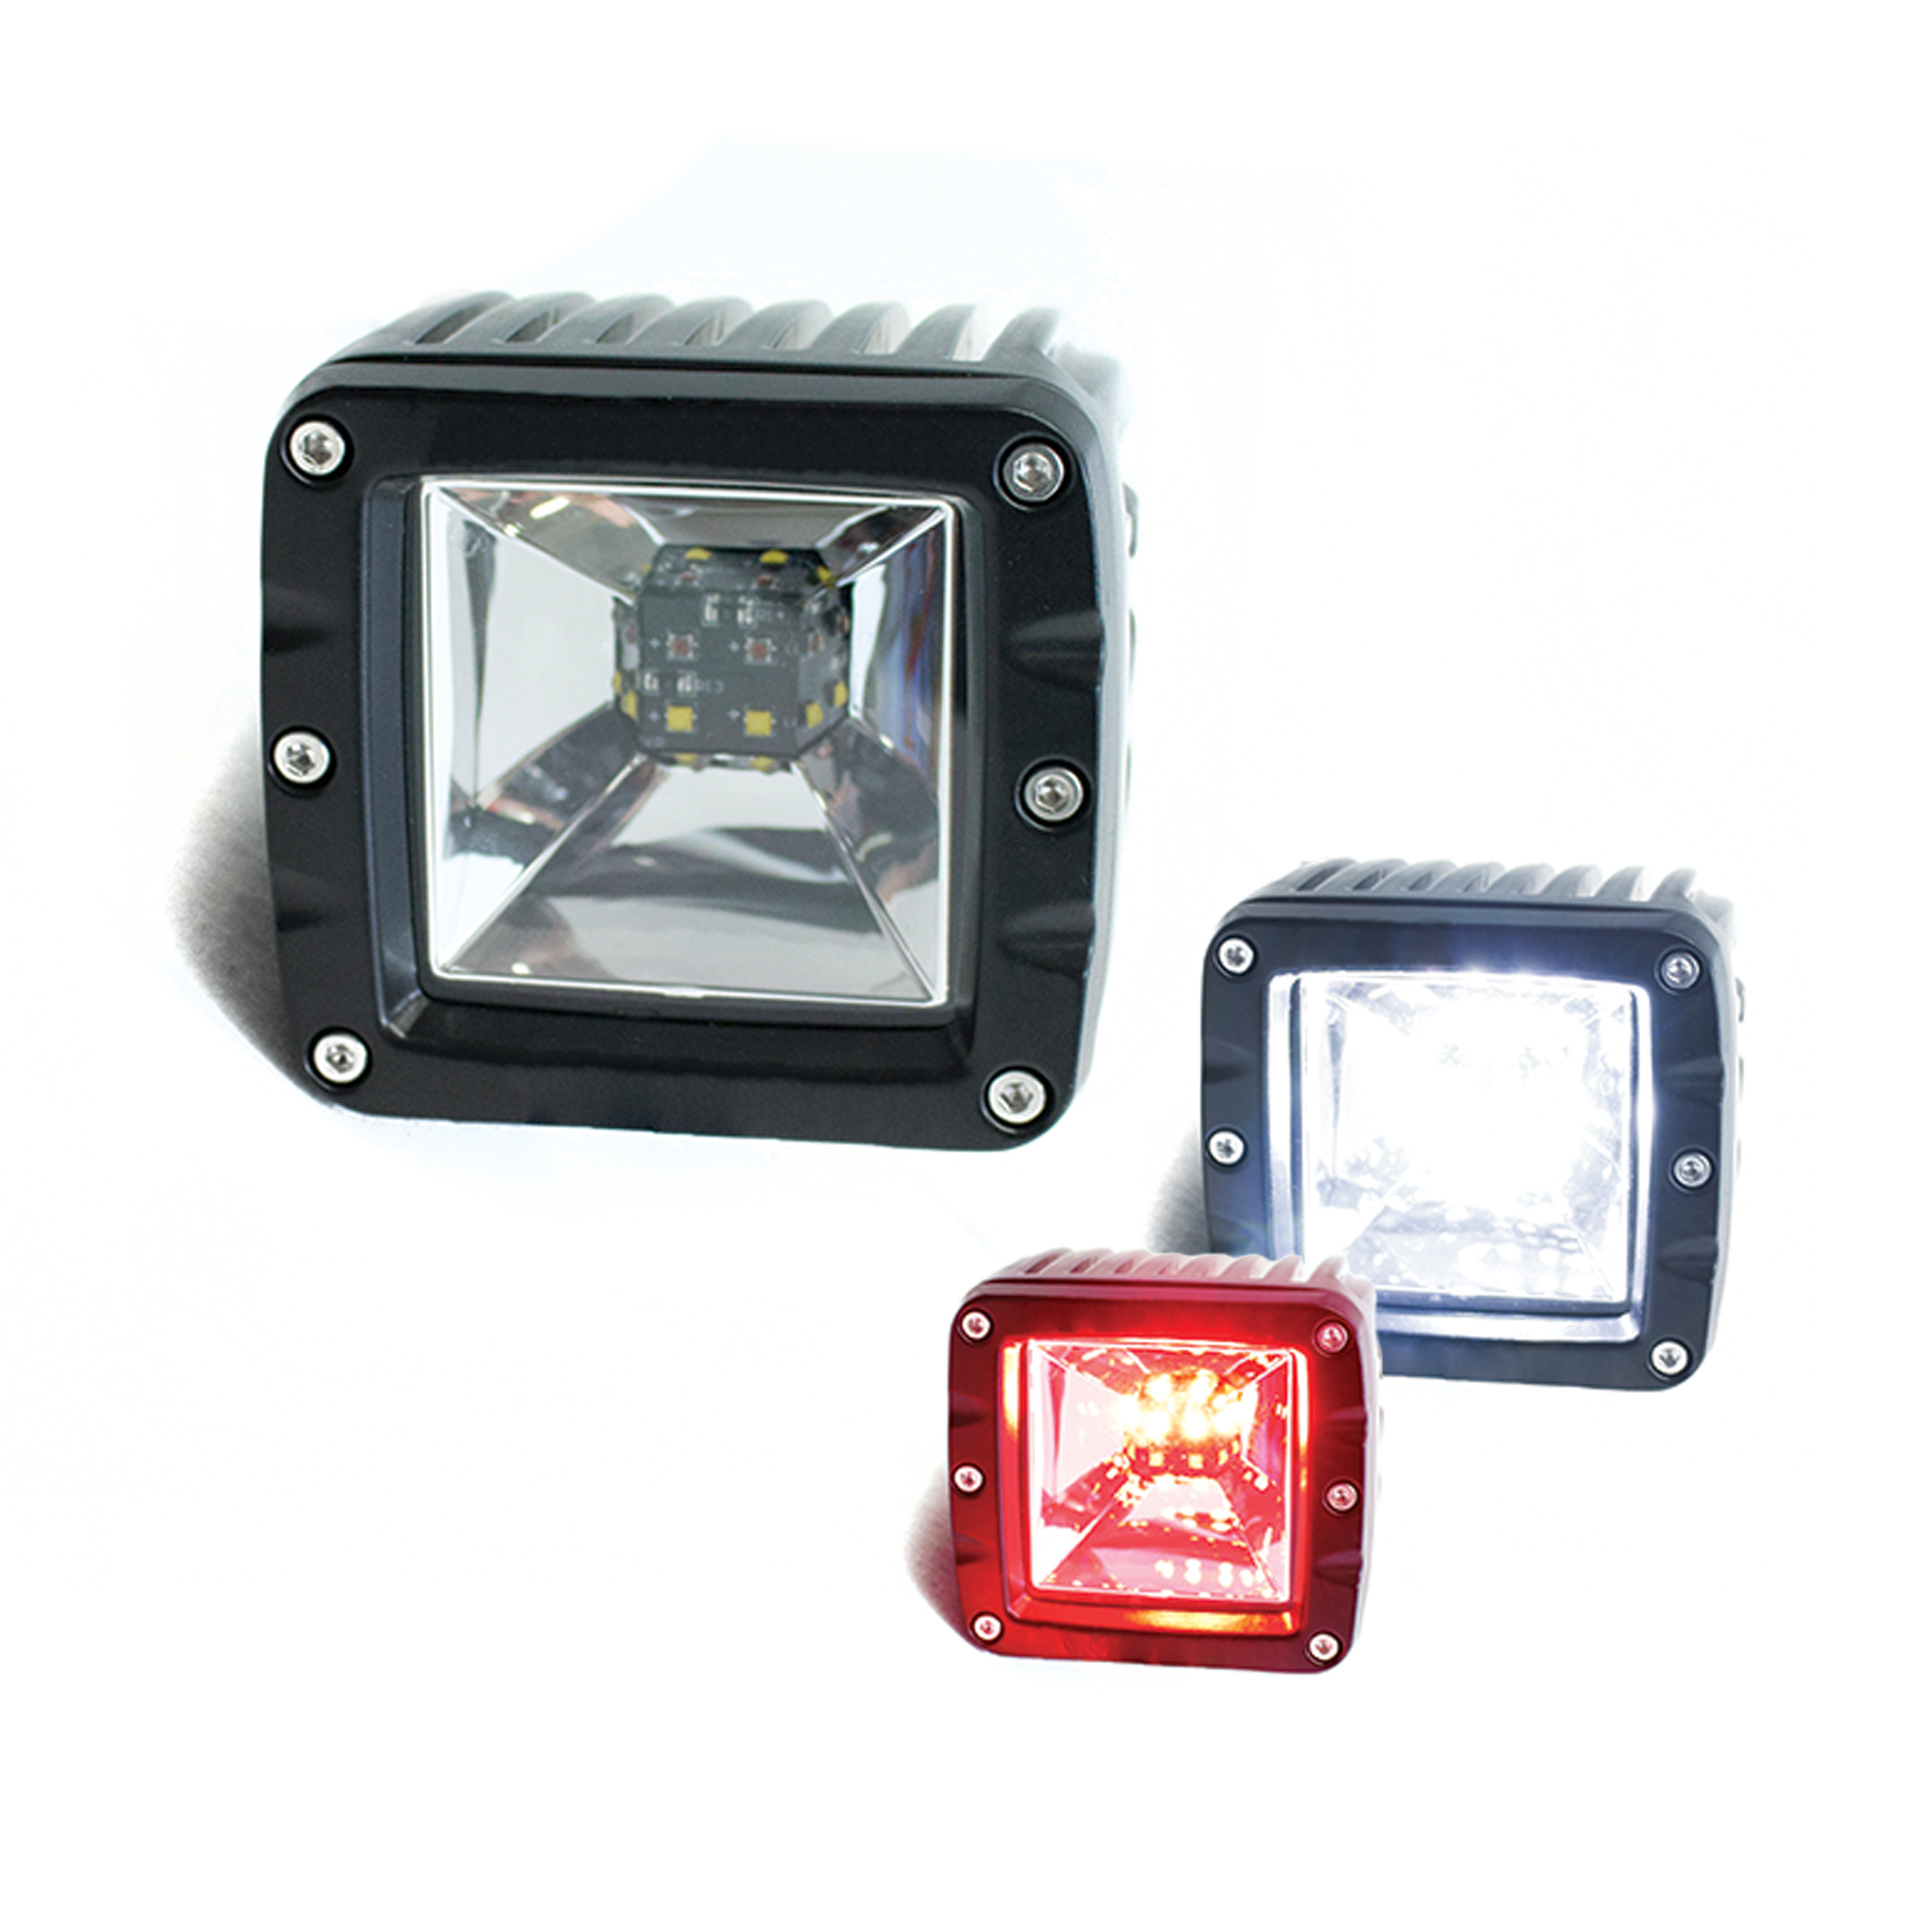 Race Sport Lighting, 3x3Inch 2-Func LED Cube Style Rear Light - White/Red, Light Type LED, Lens Color Clear, Included (qty.) 1 Model 1006476